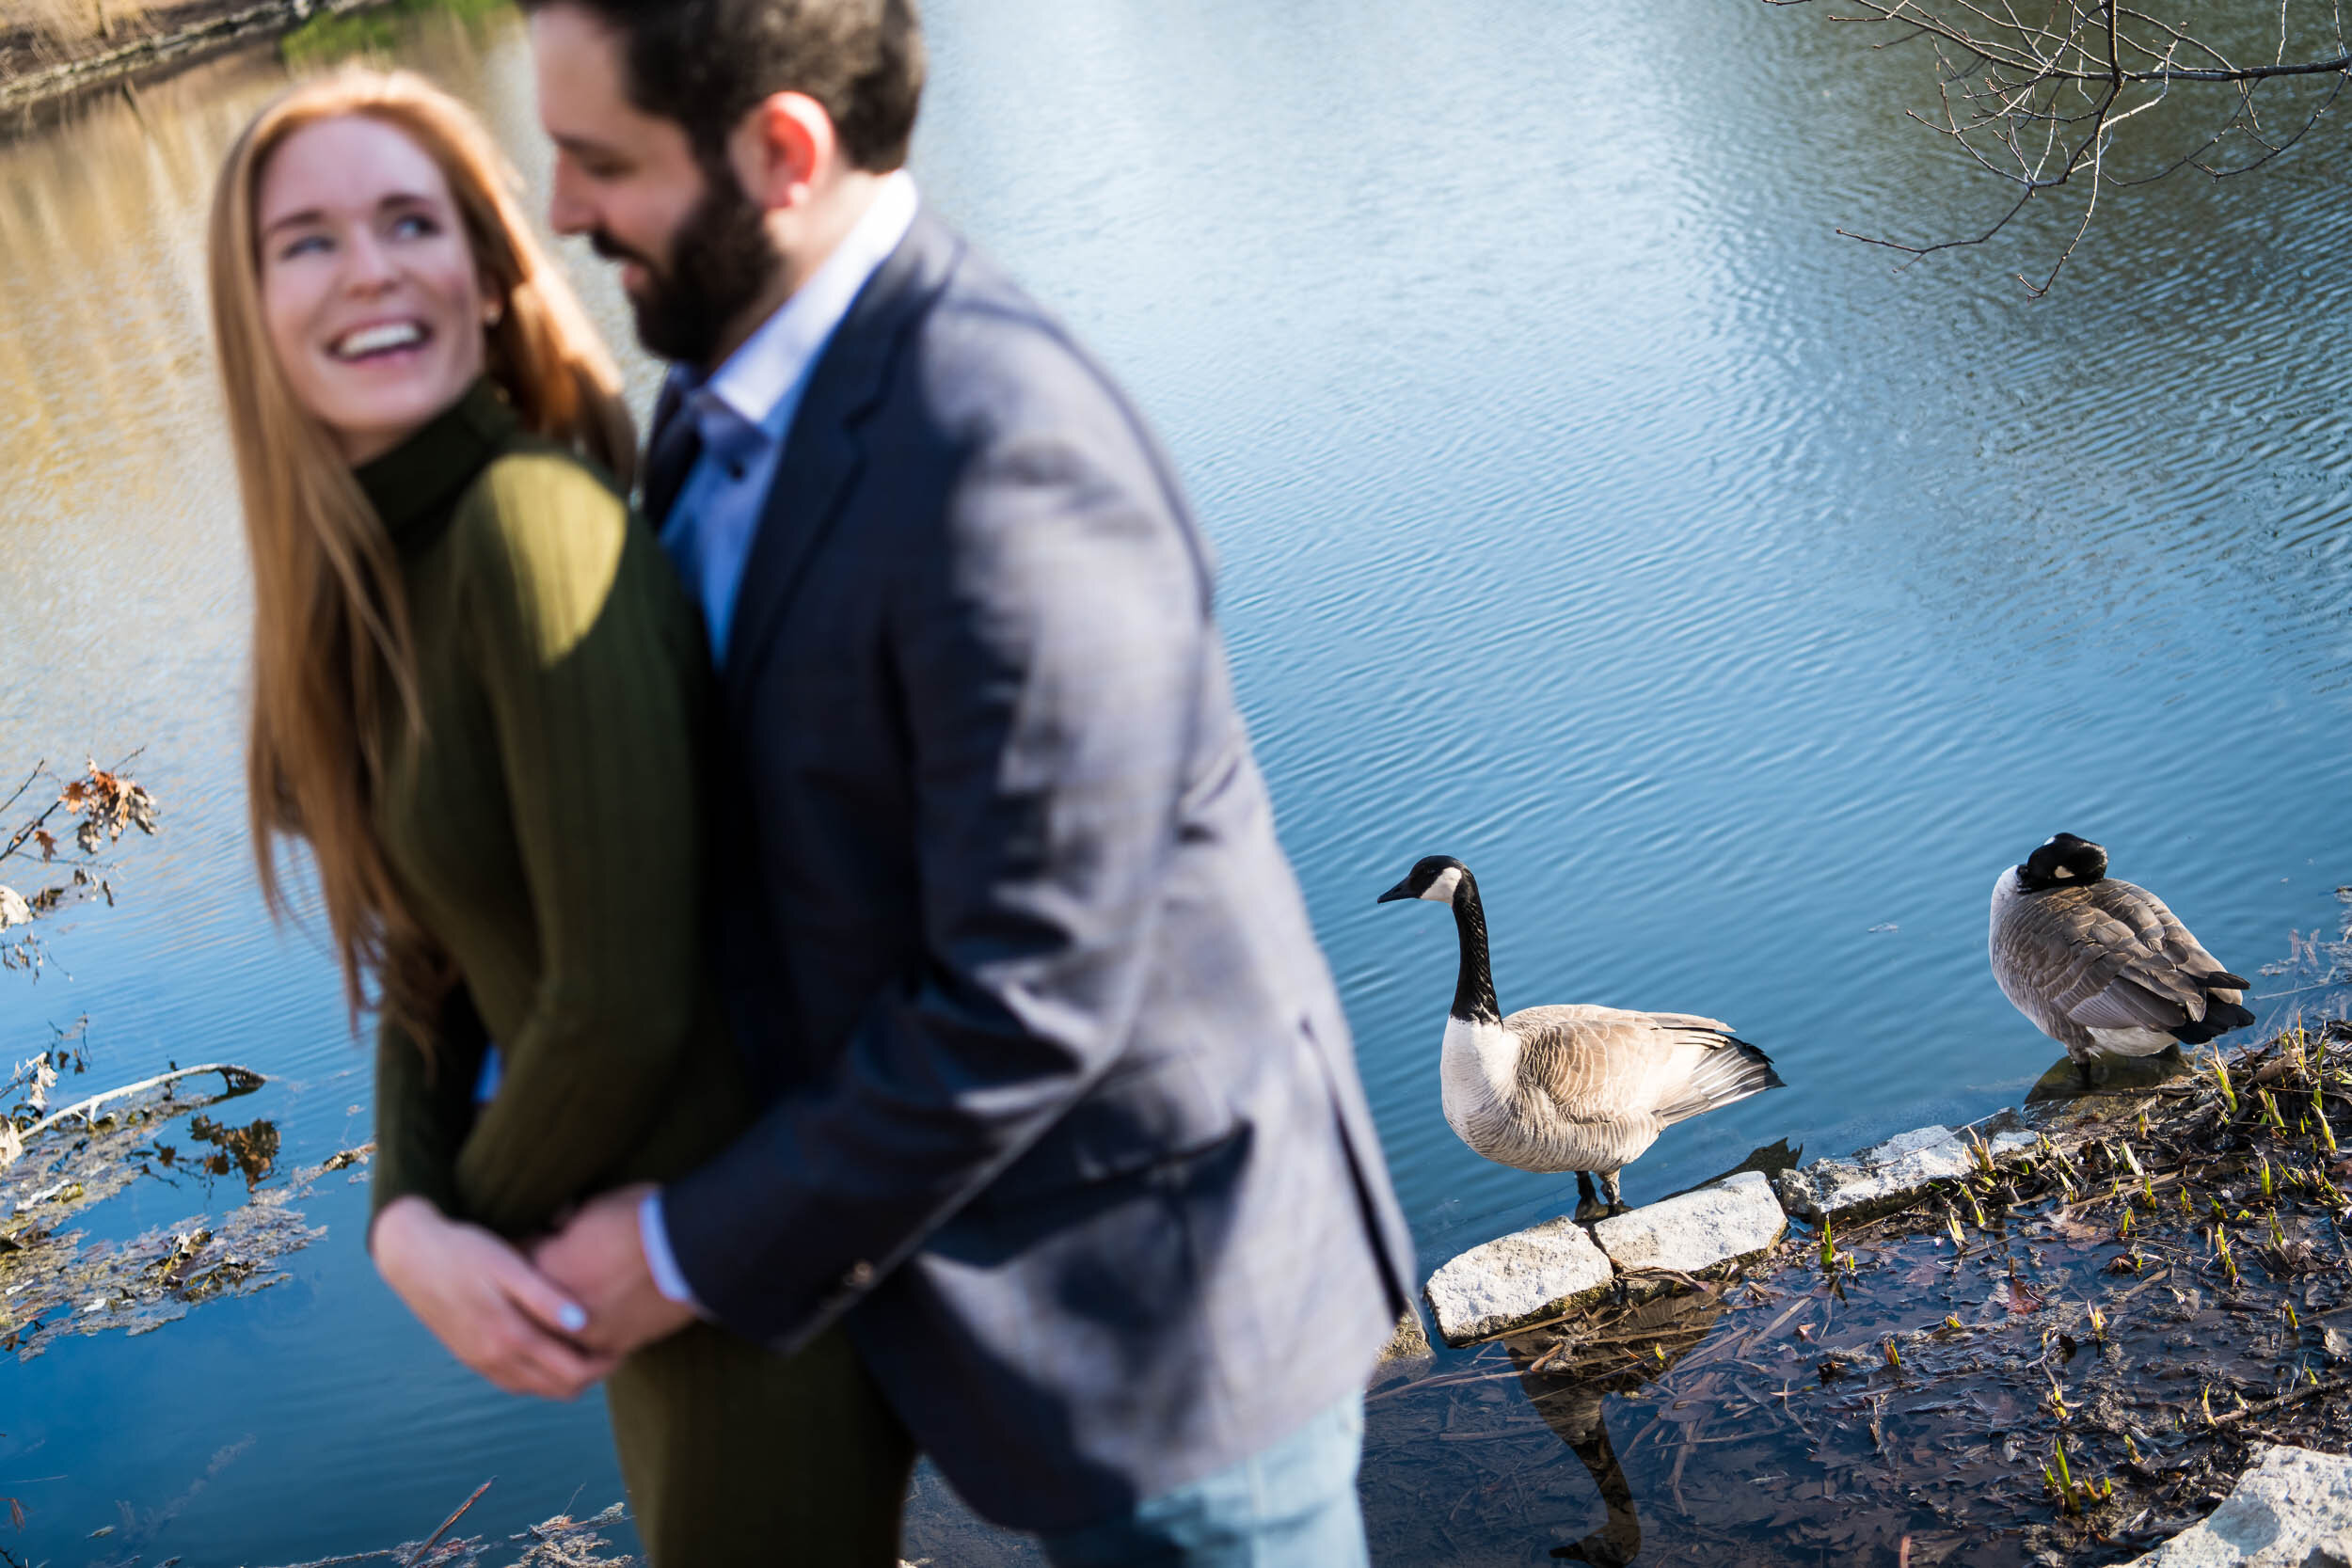 Funny photo of geese the the couple:  Chicago engagement photo by J. Brown Photography.